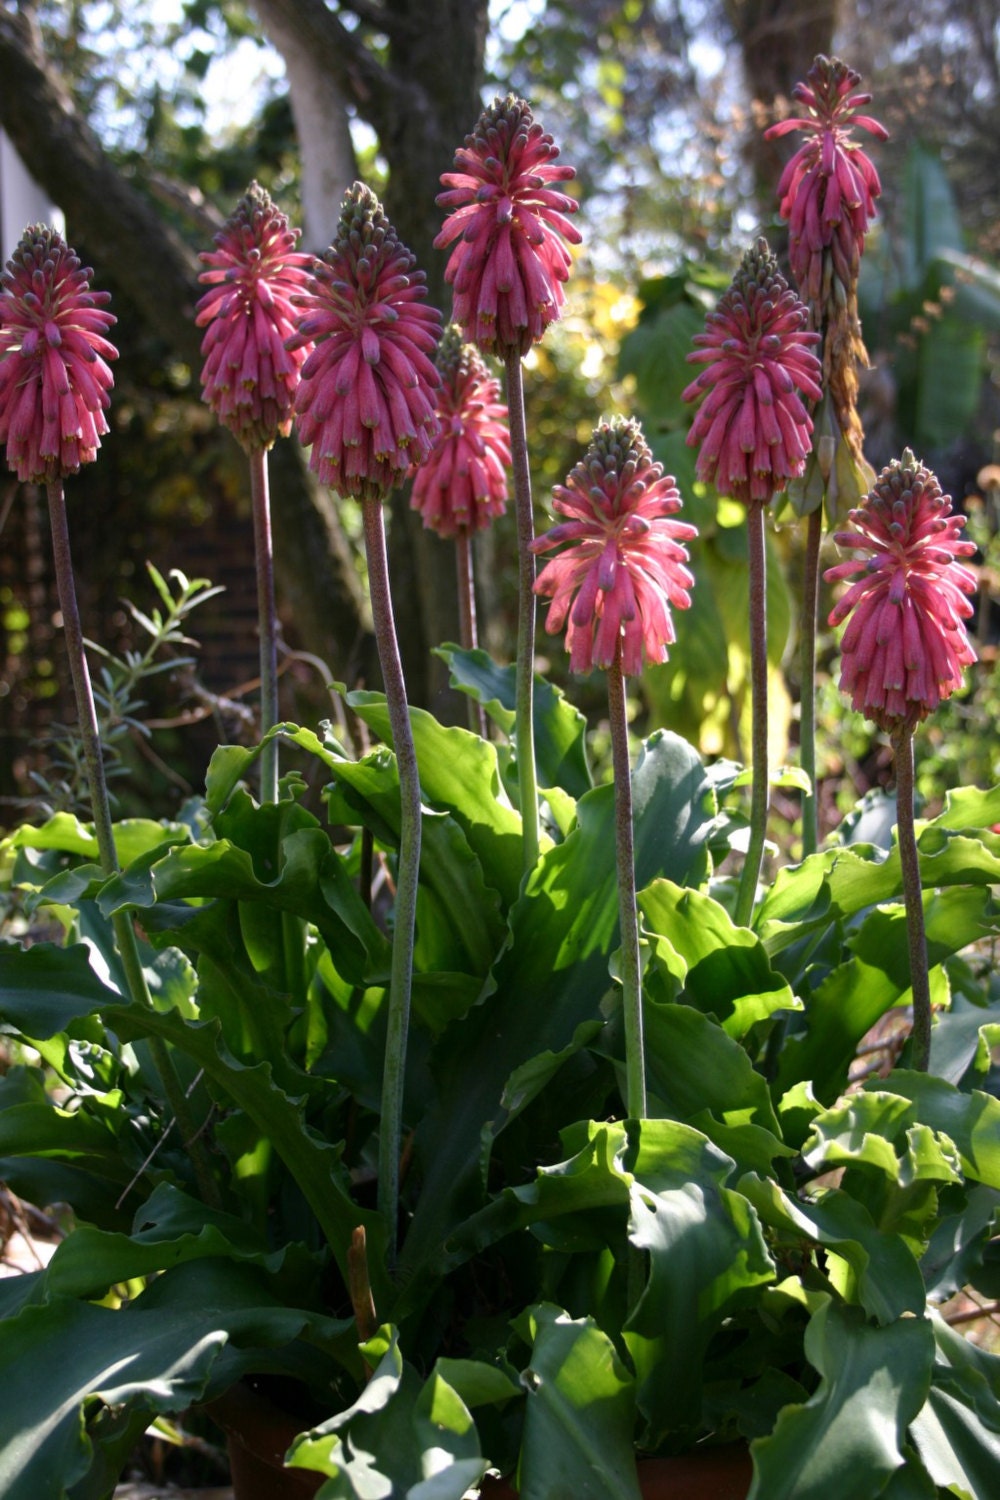 Veltheimia Bracteata * Forest Lily * Amazing Pink Perennial VERY RARE 5 Seeds *